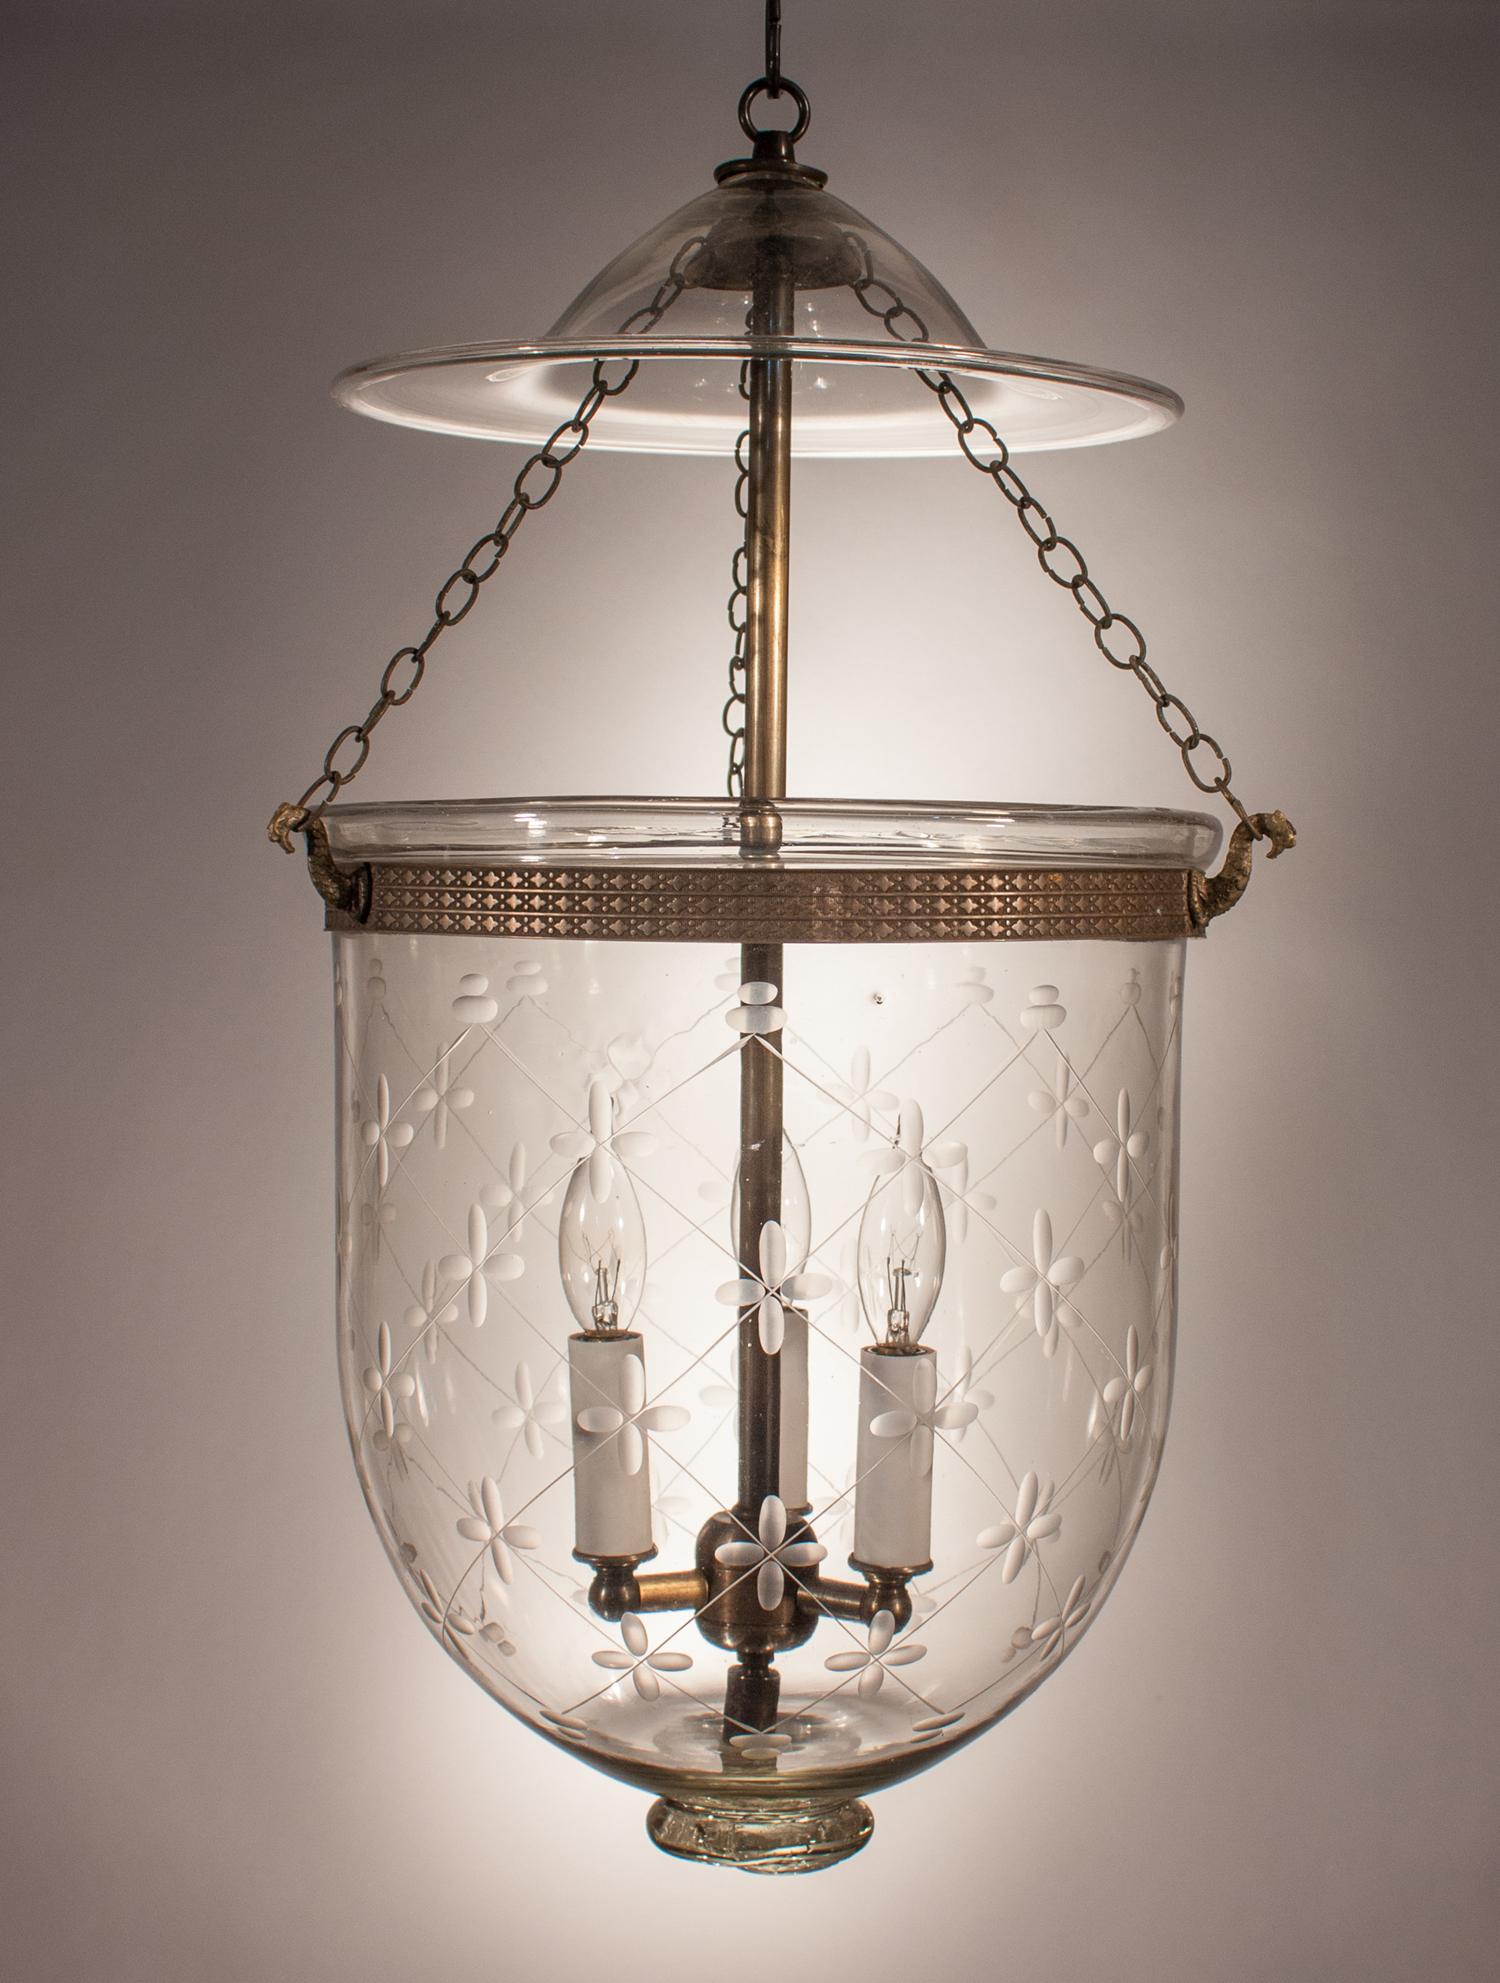 An antique bell jar lantern with lovely form and an etched climbing trellis design. This circa 1890 handblown glass pendant is in very good condition and features its original smoke bell, chains, and a unique pontil. The brass band, which has a nice